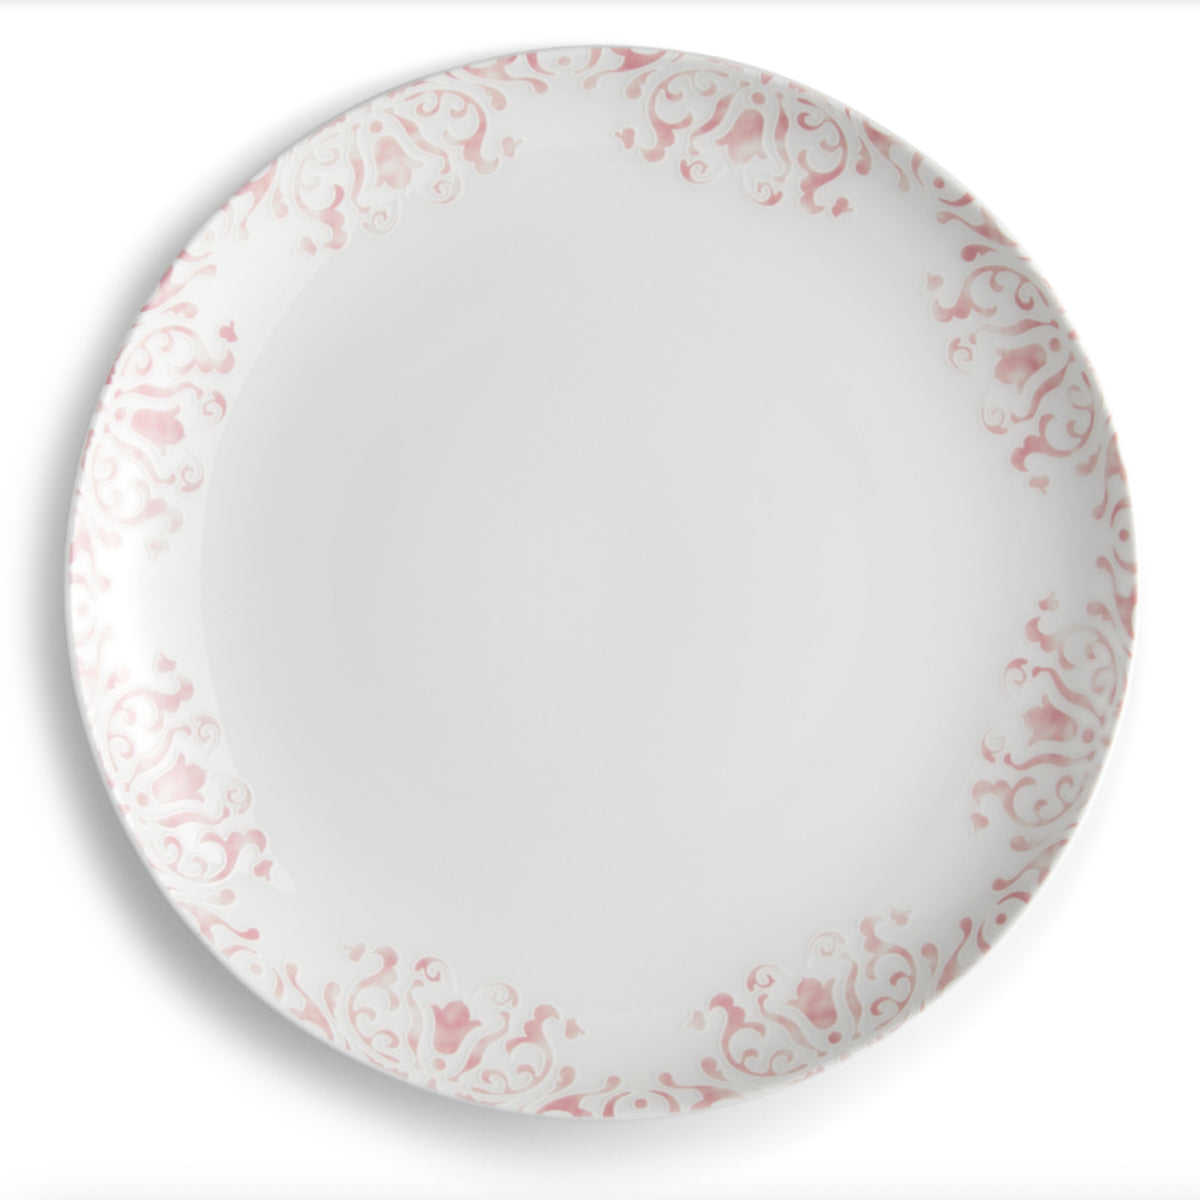 Eloise Charger Plate